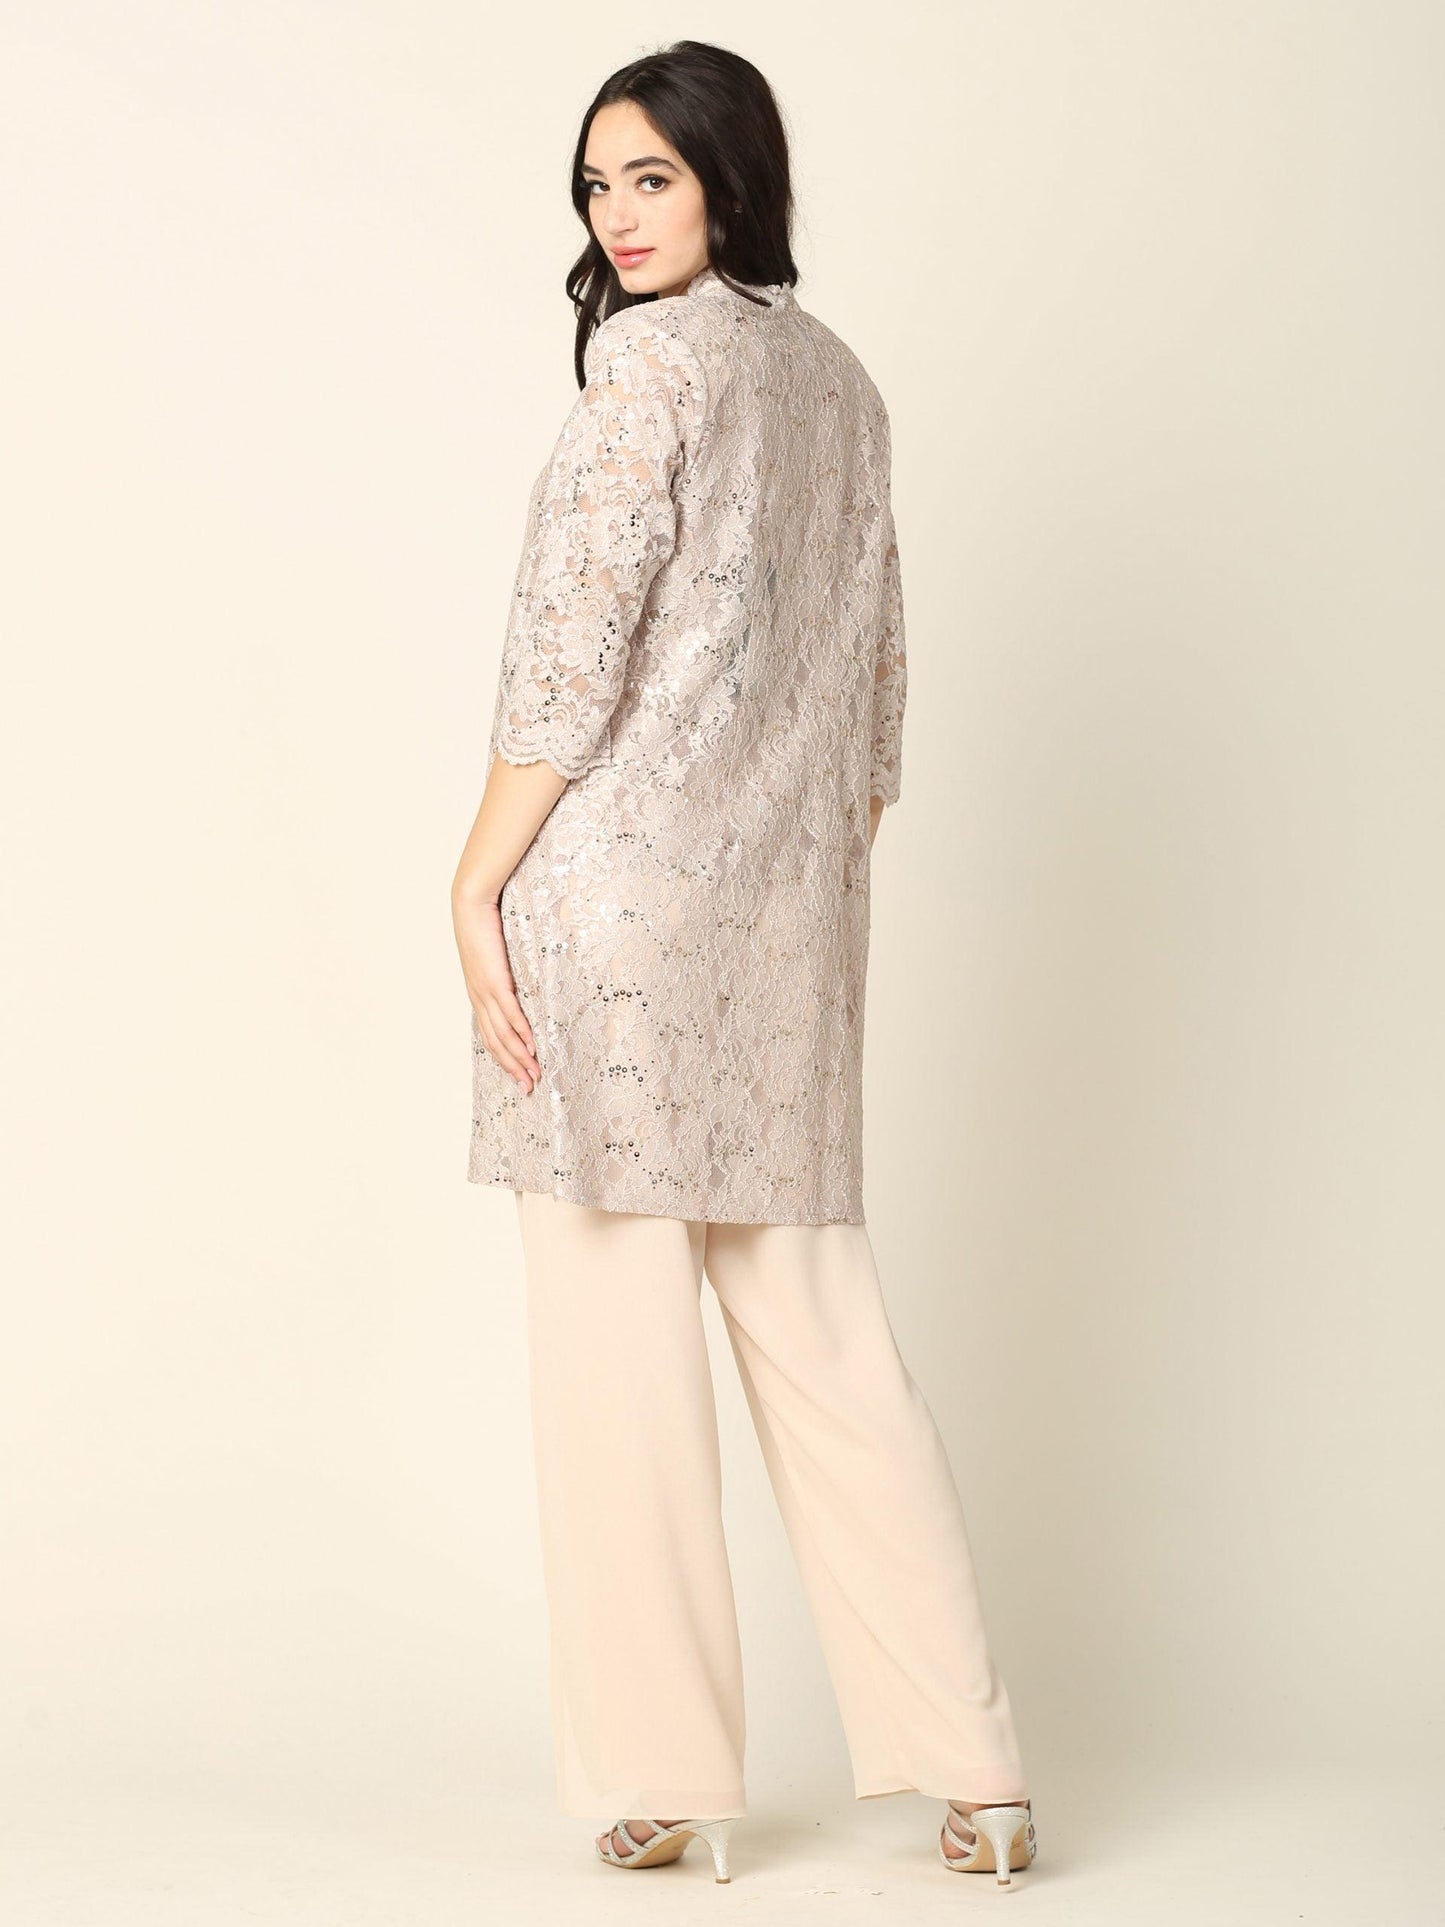 Mother of the Bride Long Jacket Pant Suit - The Dress Outlet